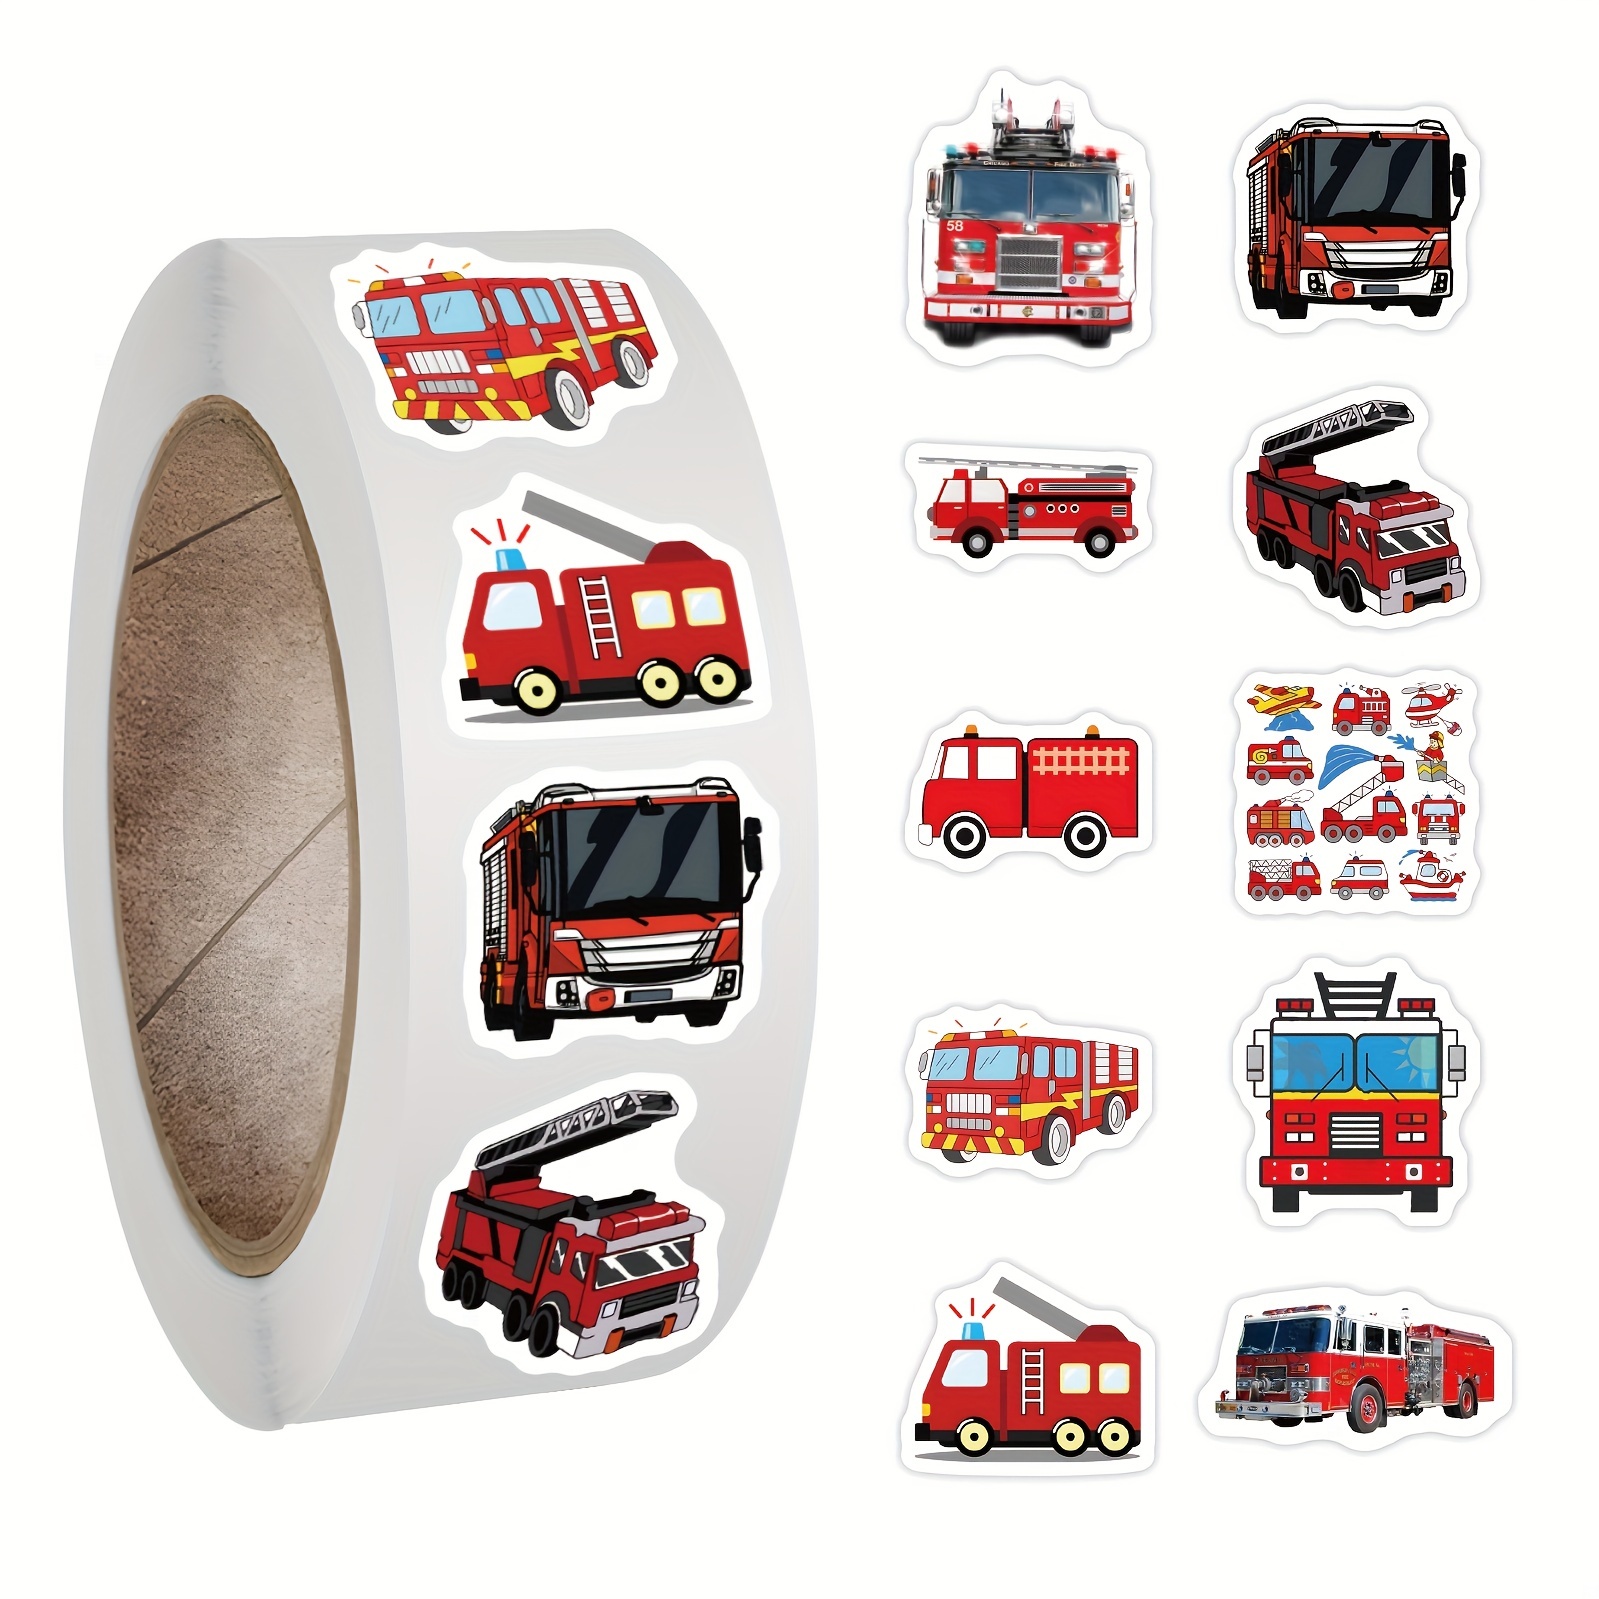 

500pcs Fire Truck Stickers Roll, Cute Cartoon Fire Fighting Engine Vehicles Vinyl Waterproof Stickers For Party Decor Water Bottle Laptop Refrigerator Skateboard Stickers Easter Gift